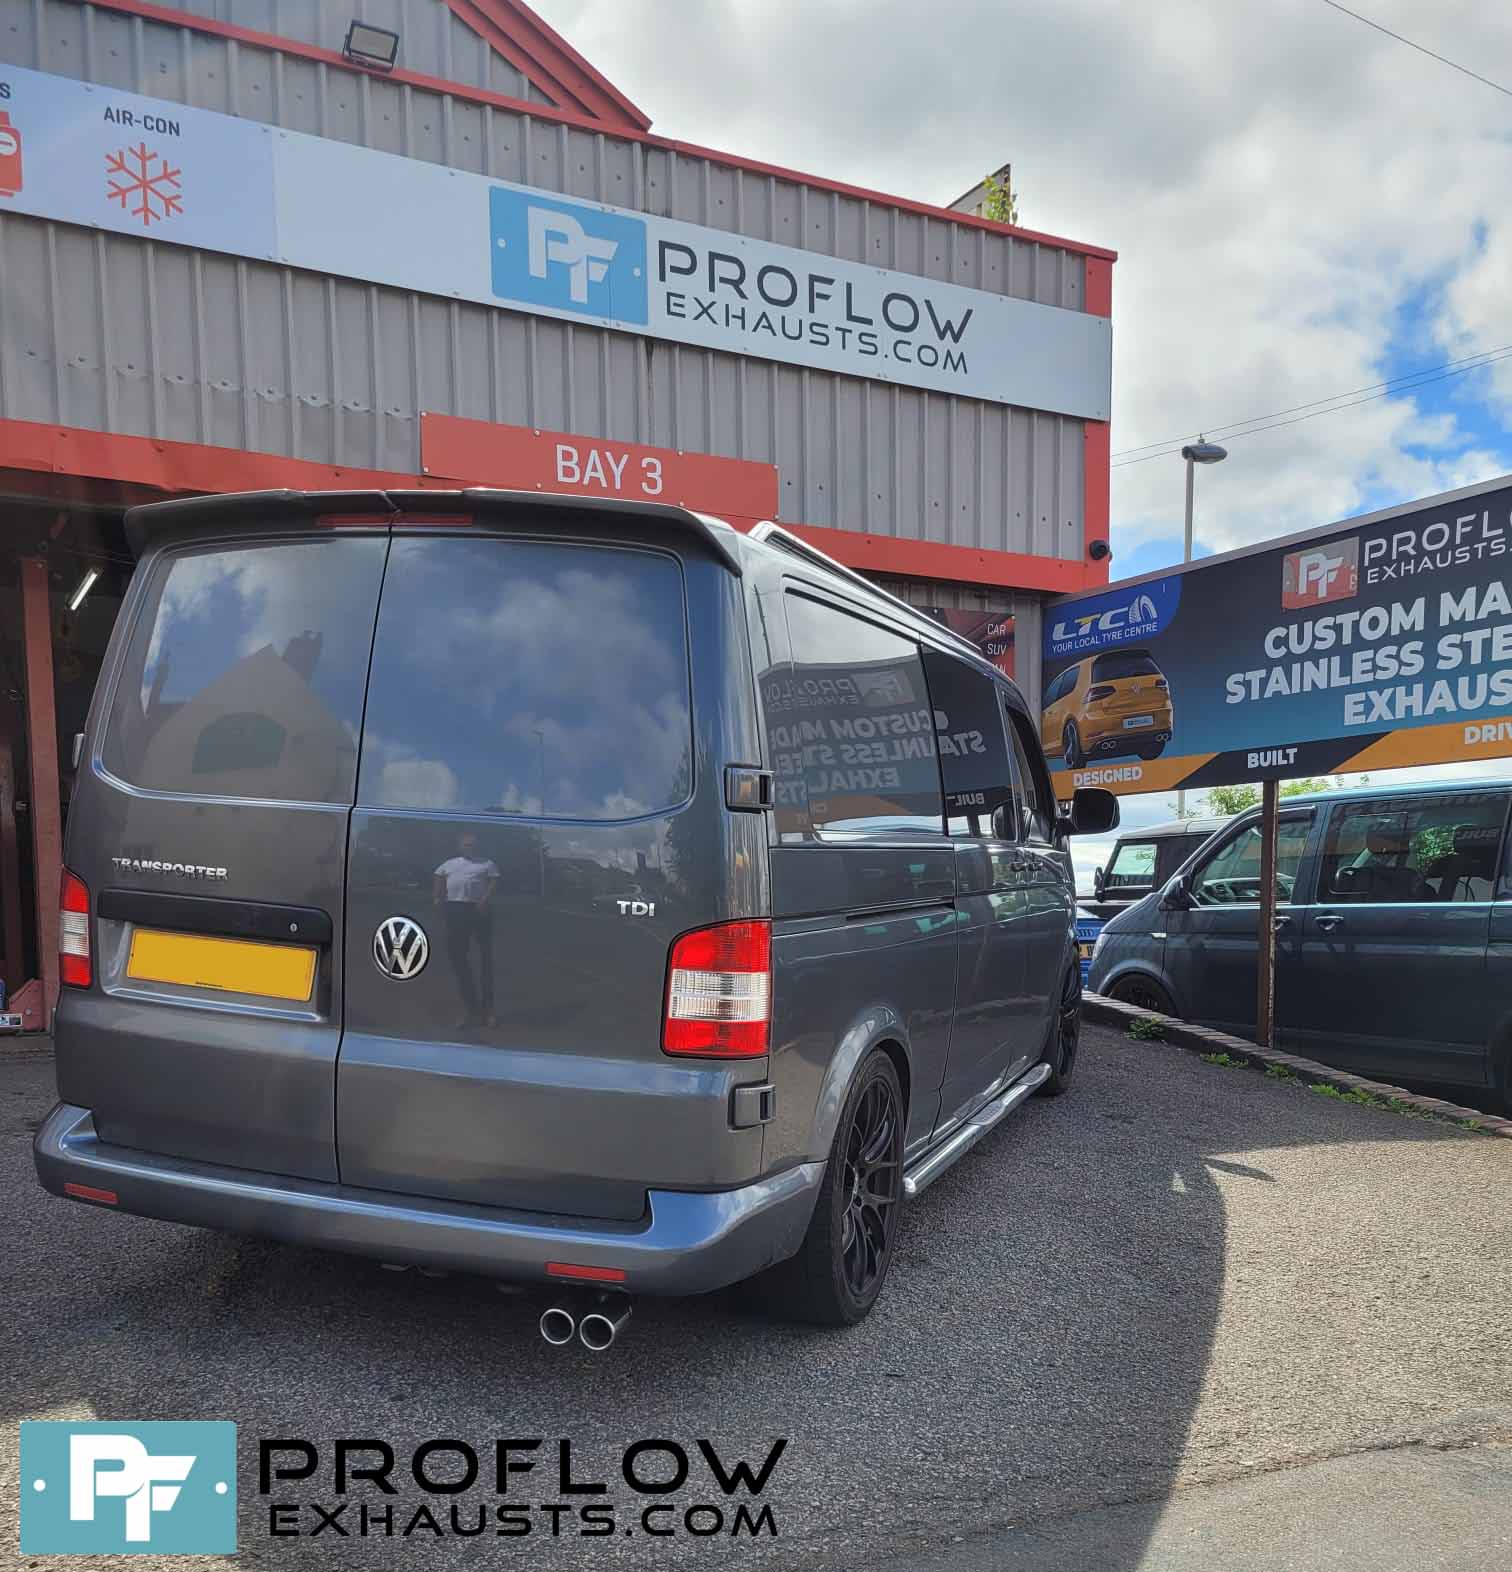 VW Transporter T5 T5.1 Stainless Steel Exhaust middle and Rear with Single Exit TX004 Tailpipe